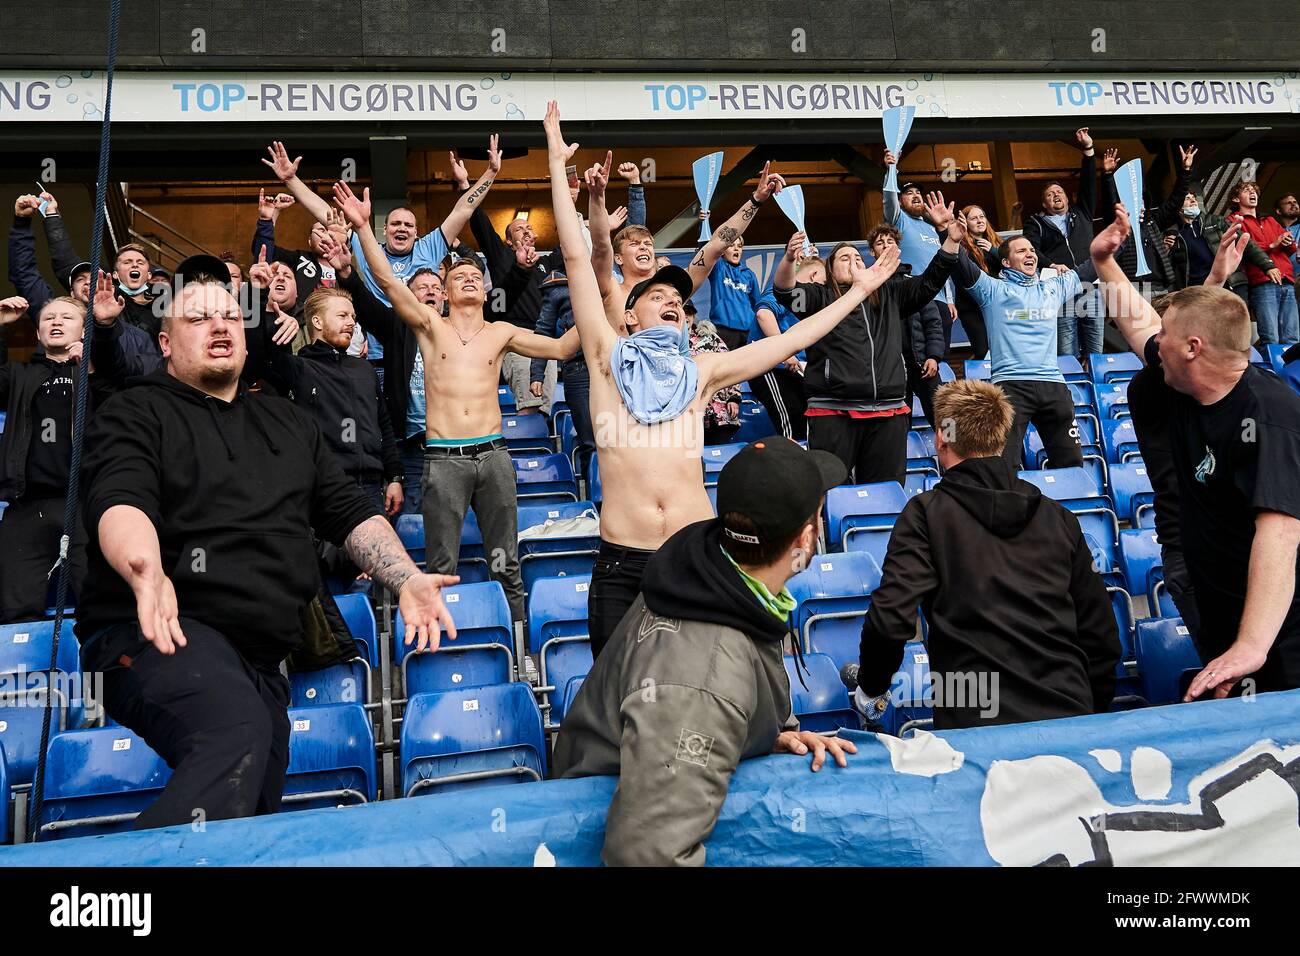 Randers, Denmark. 24th May, 2021. Football fans of Randers FC seen in the stands during the 3F Superliga match Randers FC and FC Copenhagen at Cepheus Park in (Photo Credit: